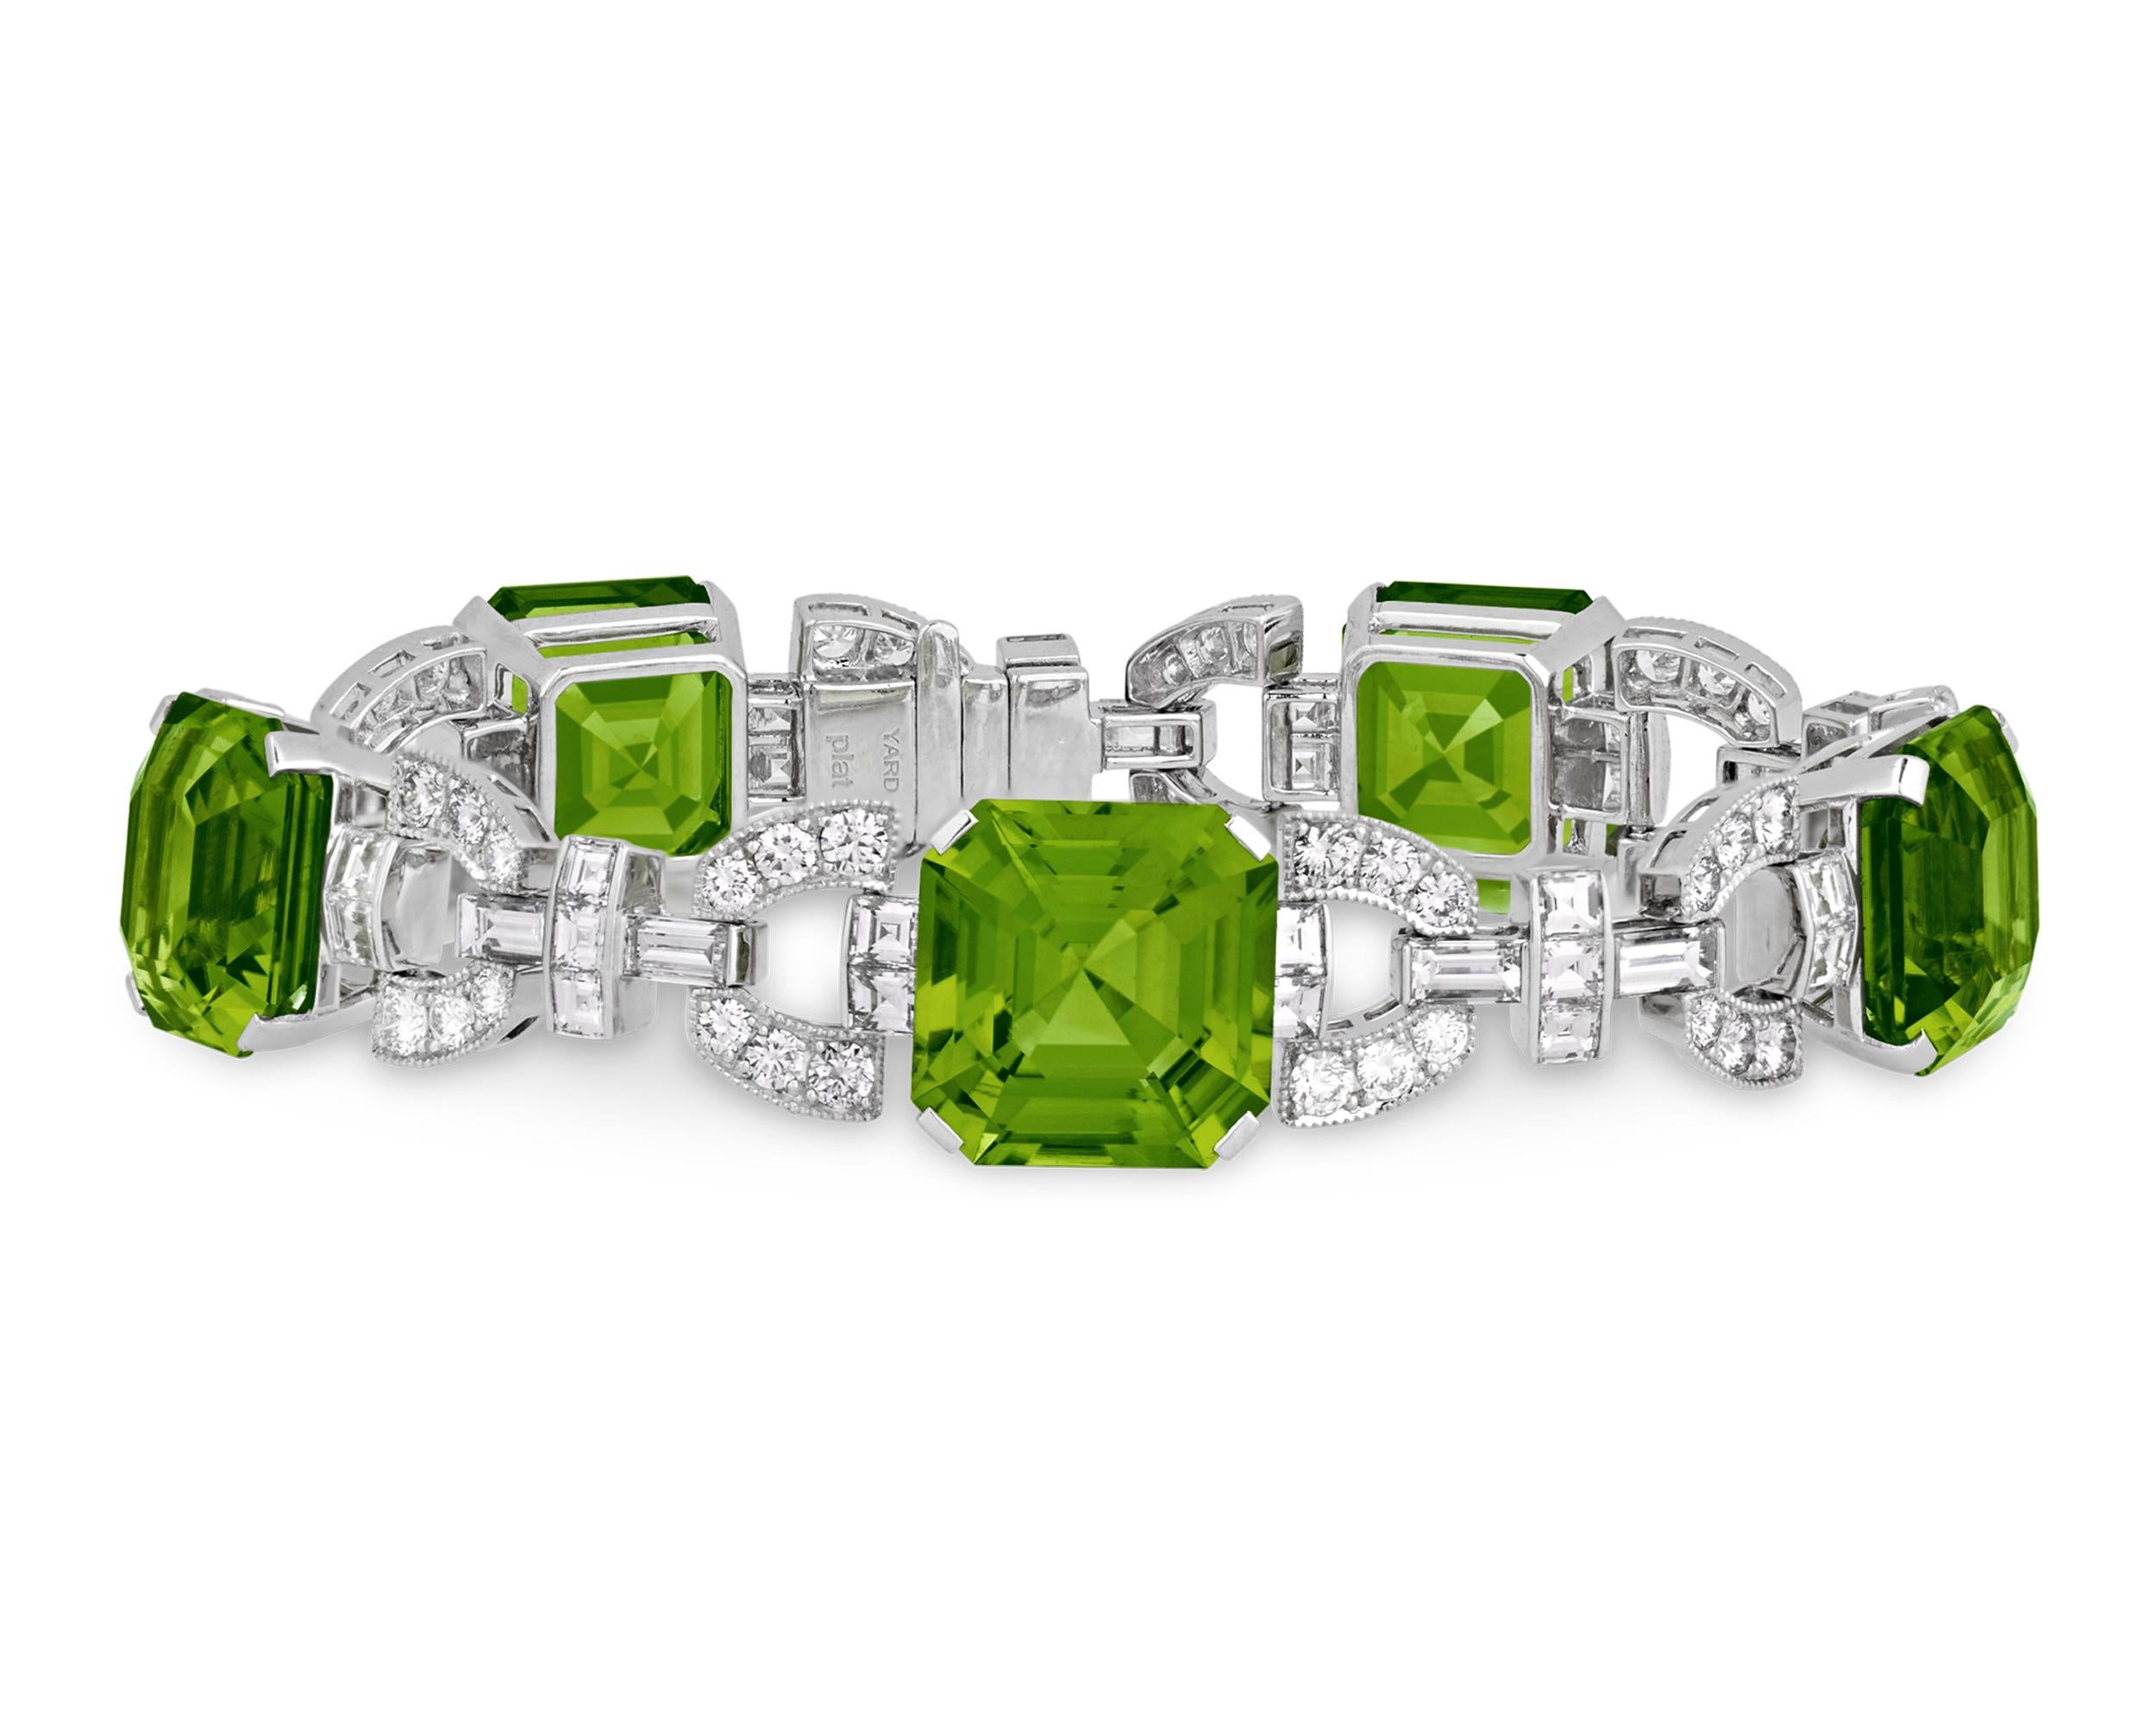 This magnificent bracelet by celebrated jeweler Raymond Yard features five superb emerald-cut peridots totaling an impressive 46.40 carats. The radiant gemstones display their signature vibrant green hue with timeless elegance. Among the most